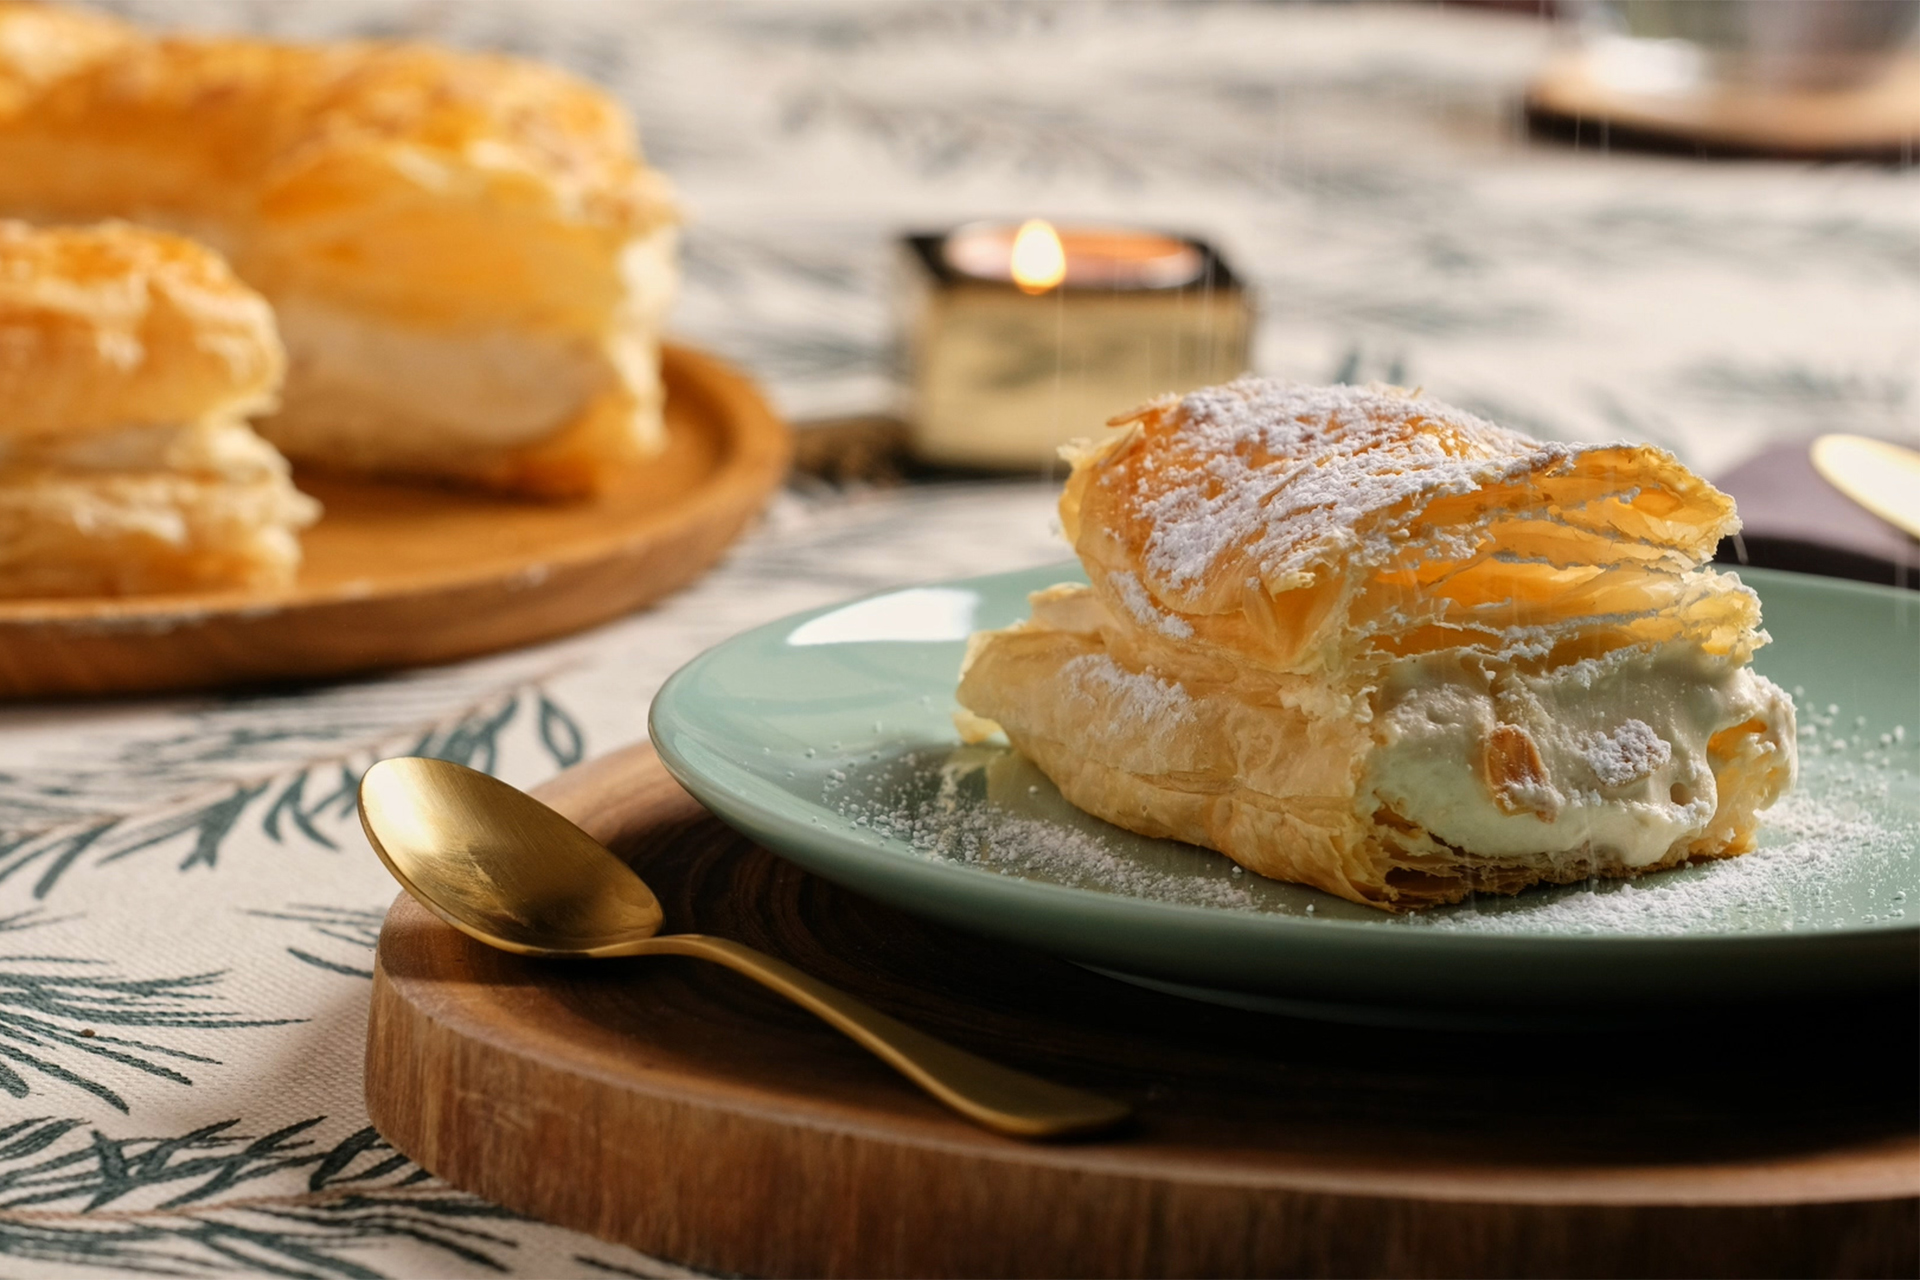 3 Kings' puff pastry cake with nougat